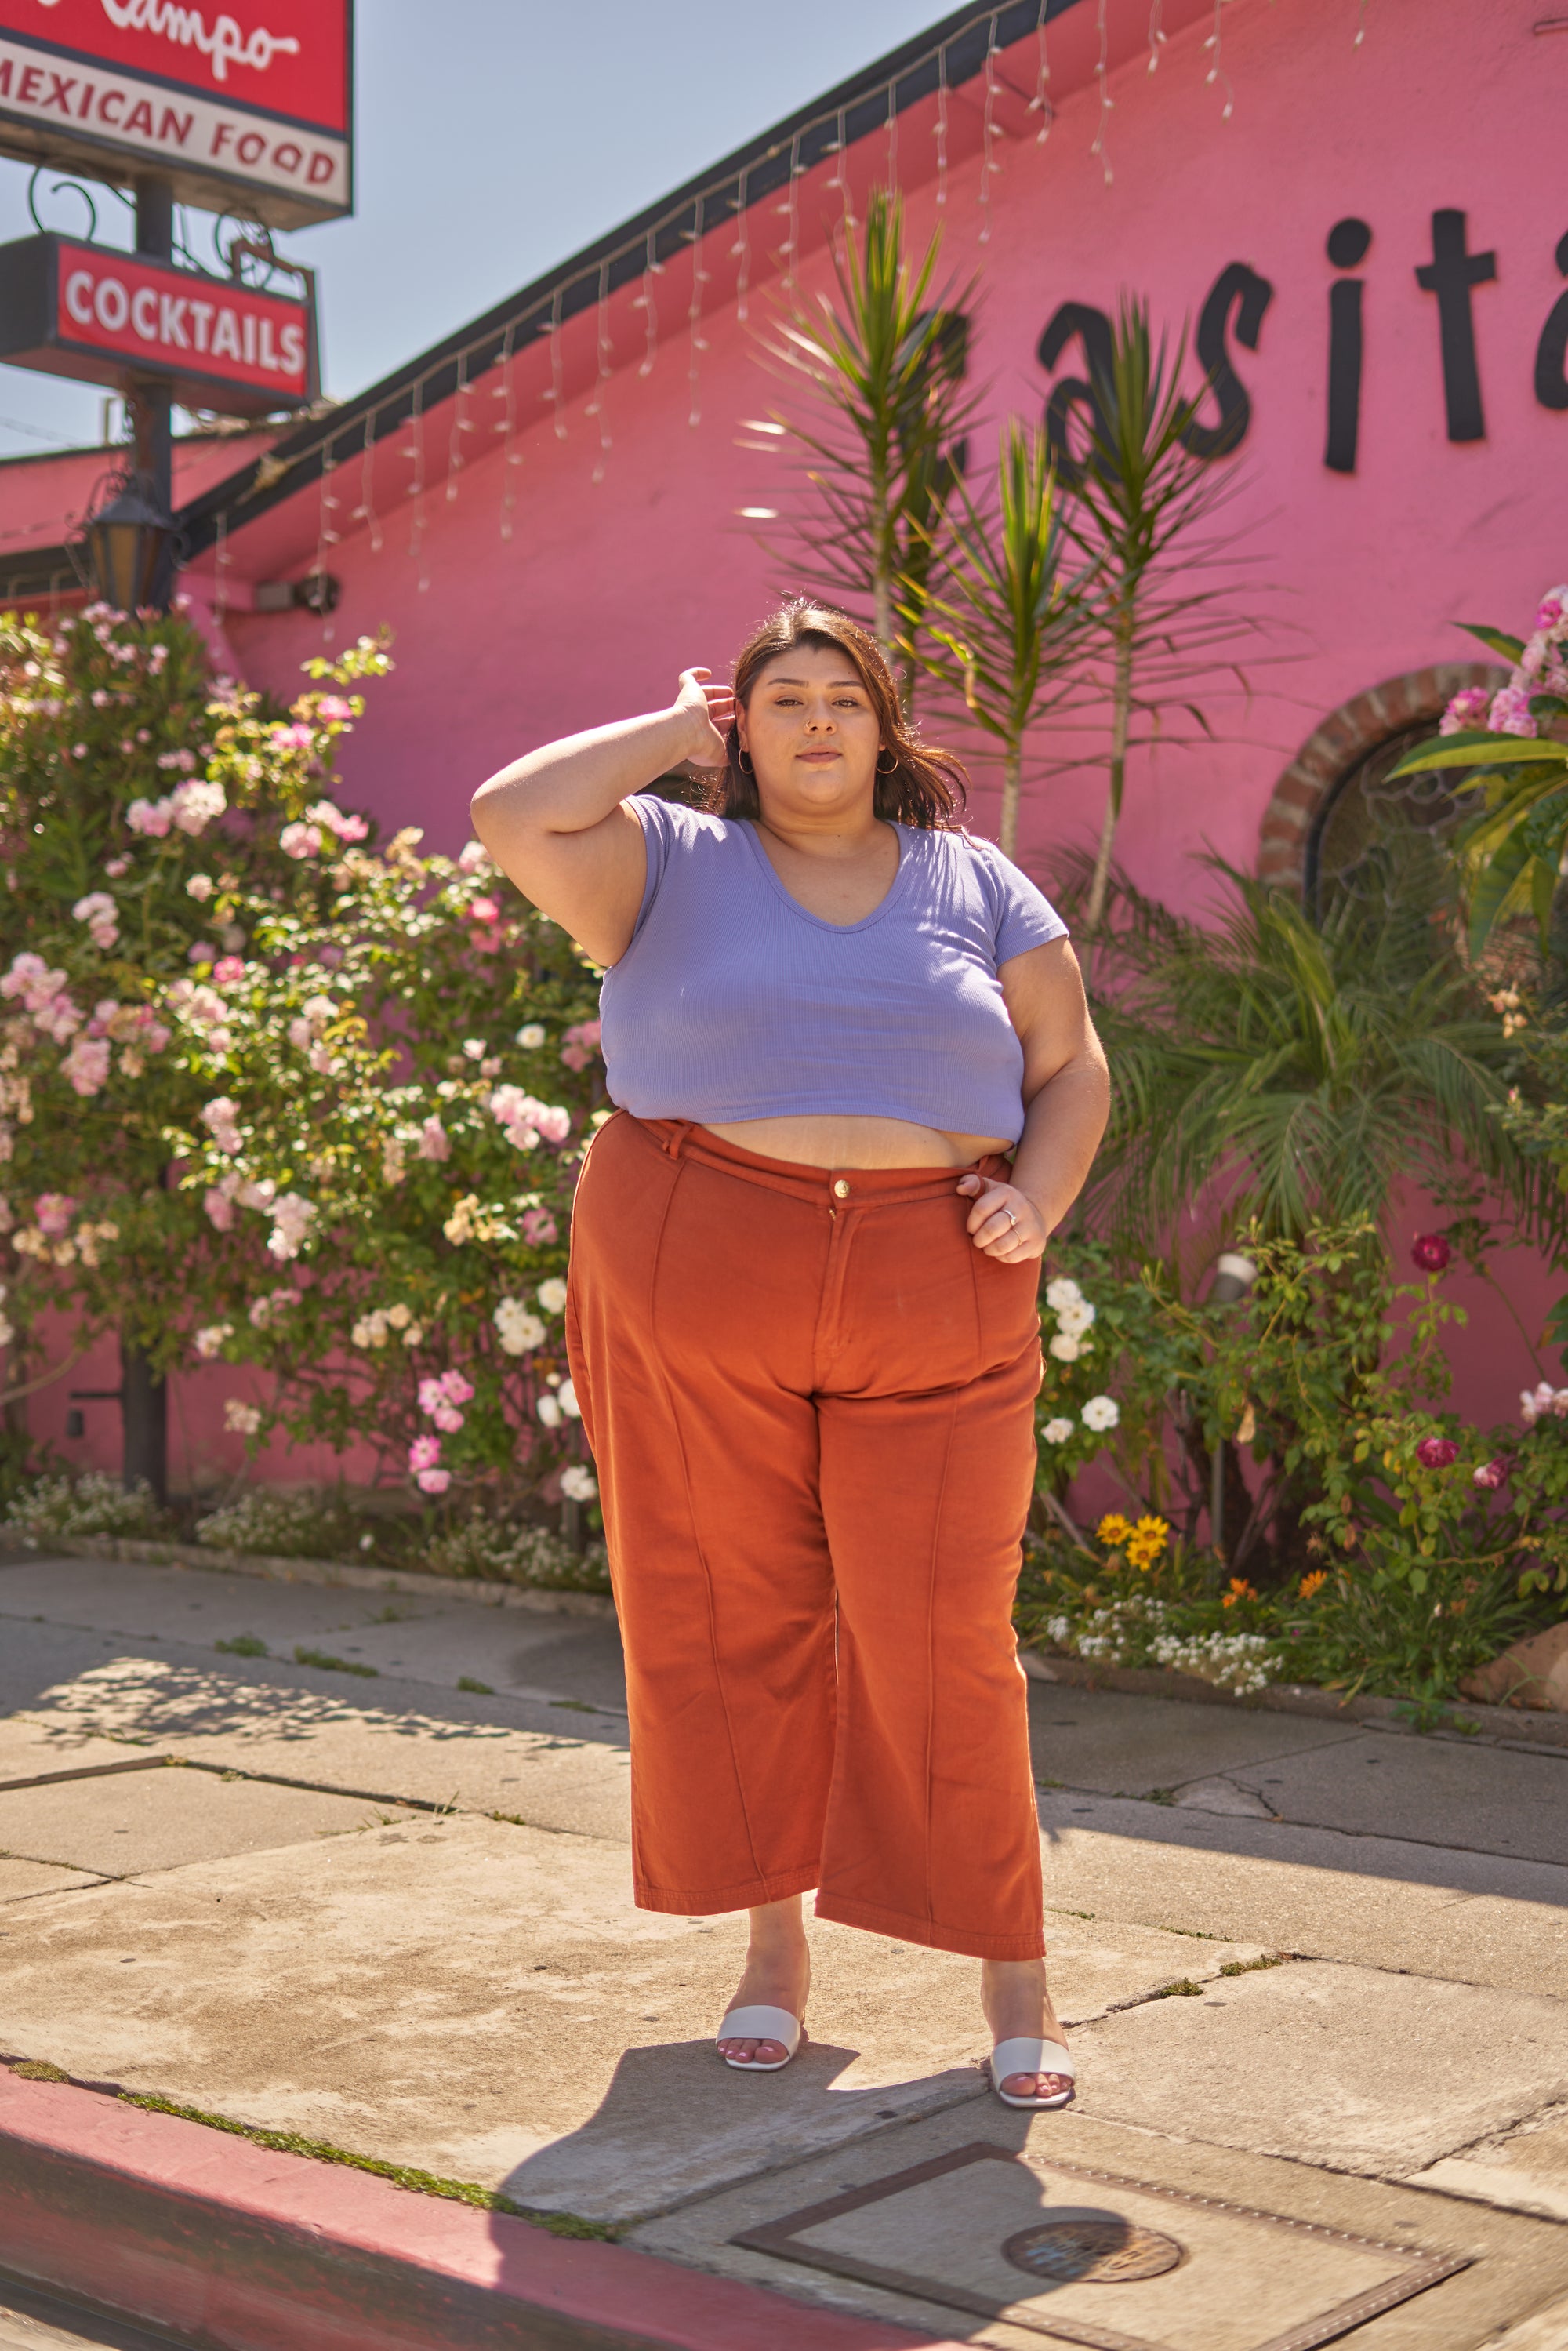 Sarita wearing Short Sleeve V-Neck Tee in Faded Grape and Western Pants in Burnt Terracotta